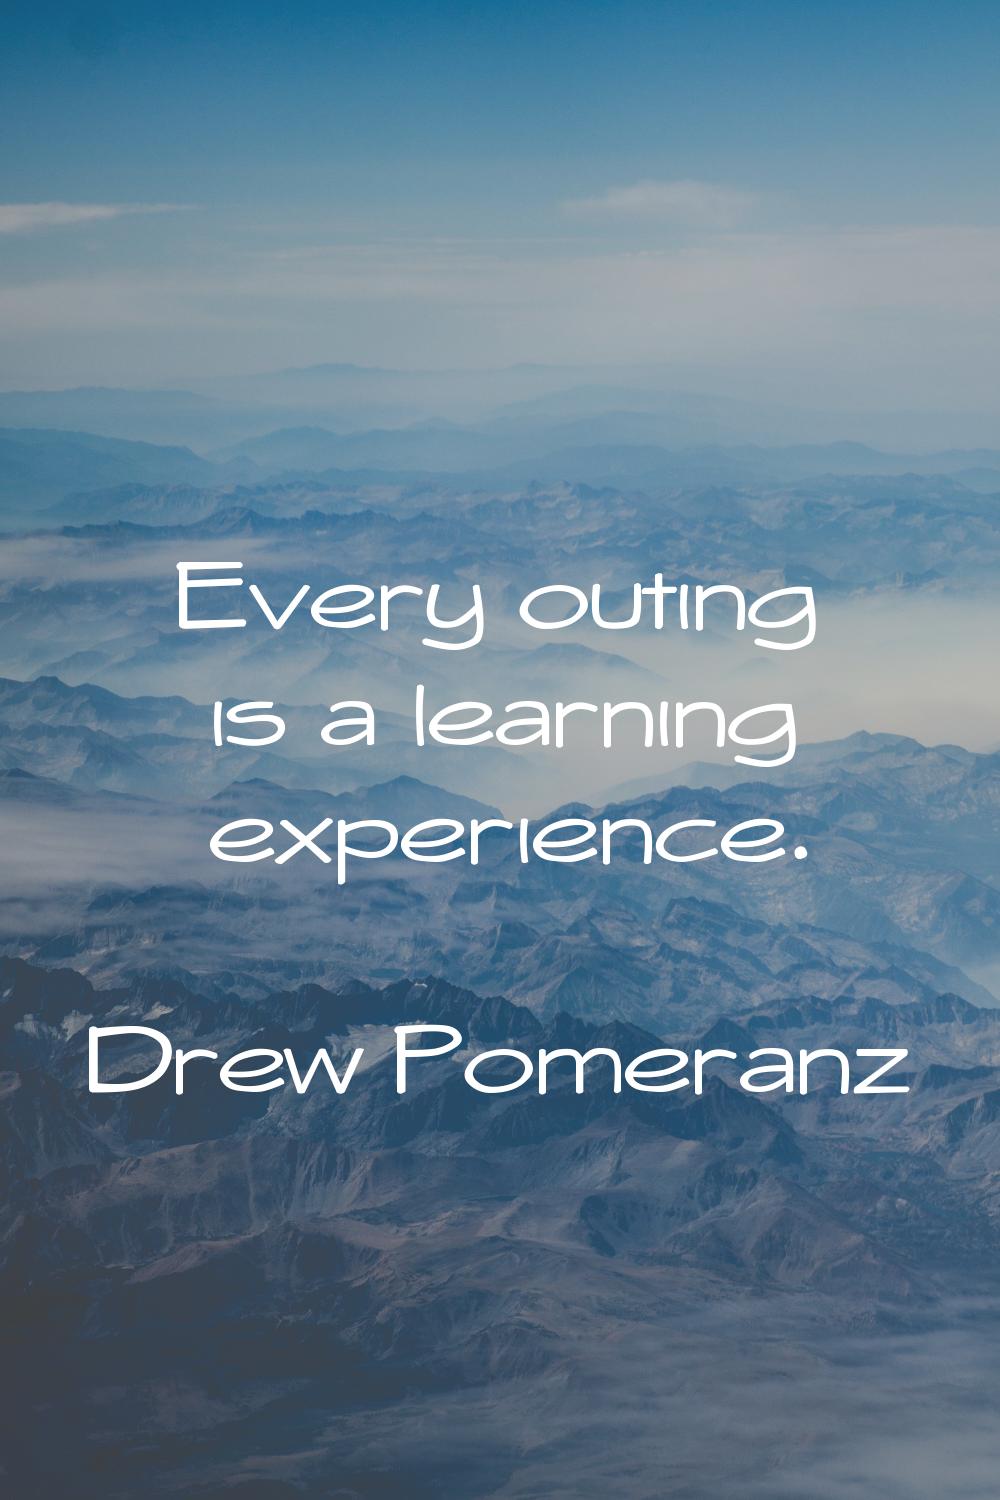 Every outing is a learning experience.